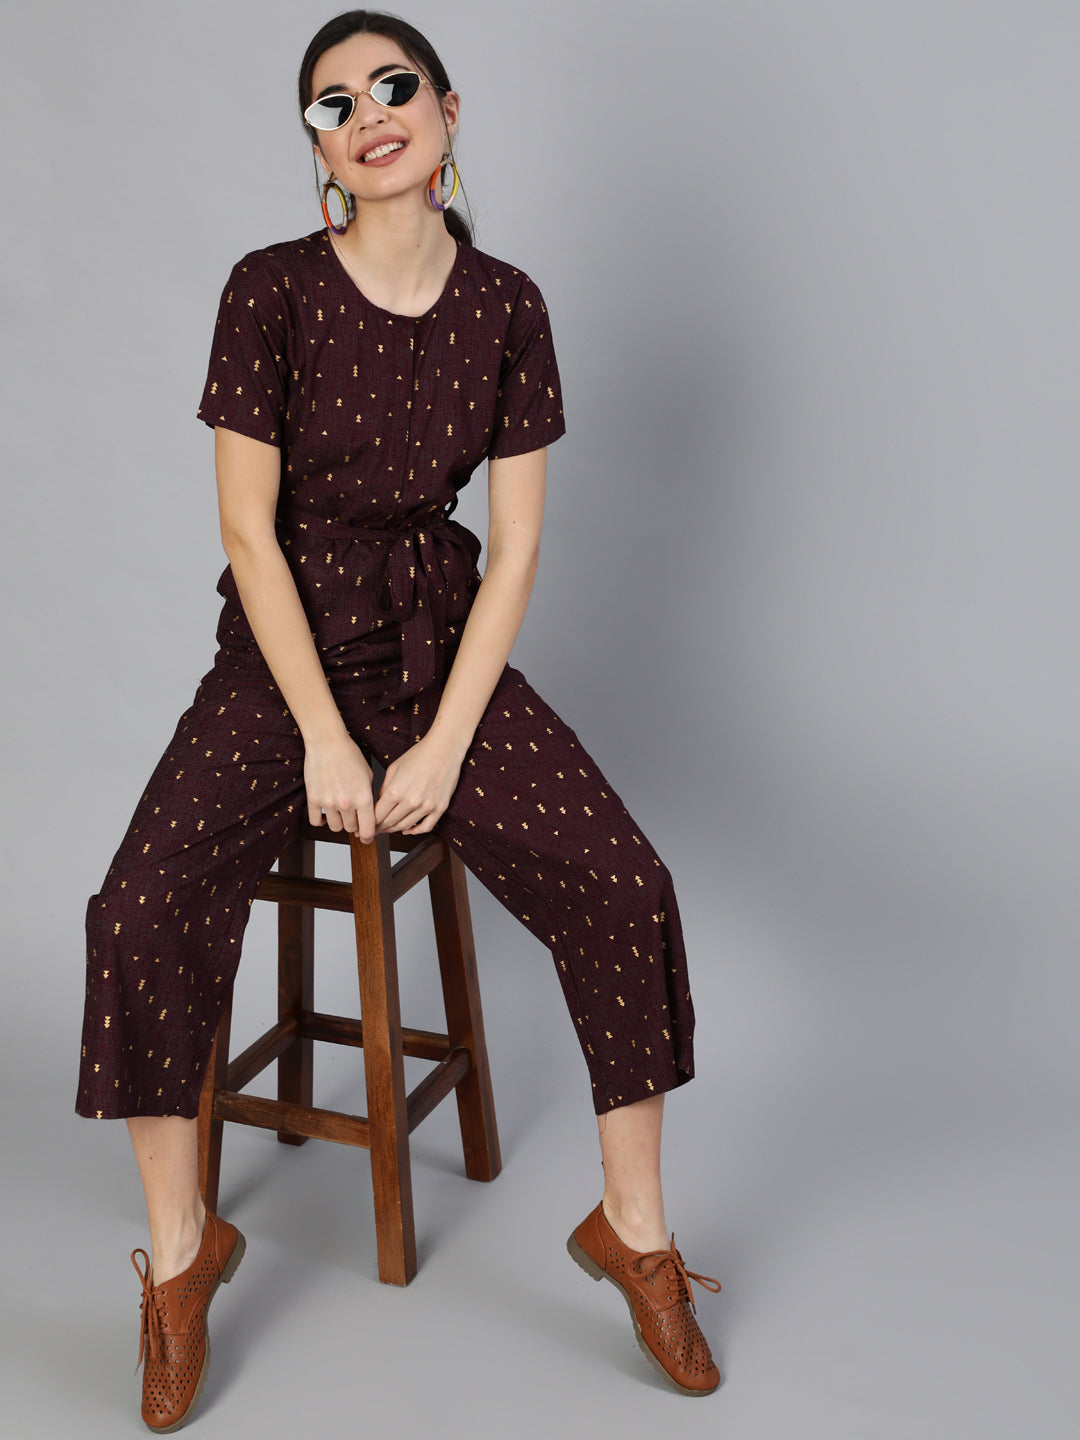 Women's Burgundy Printed Jumpsuit With Side Pockets - Nayo Clothing